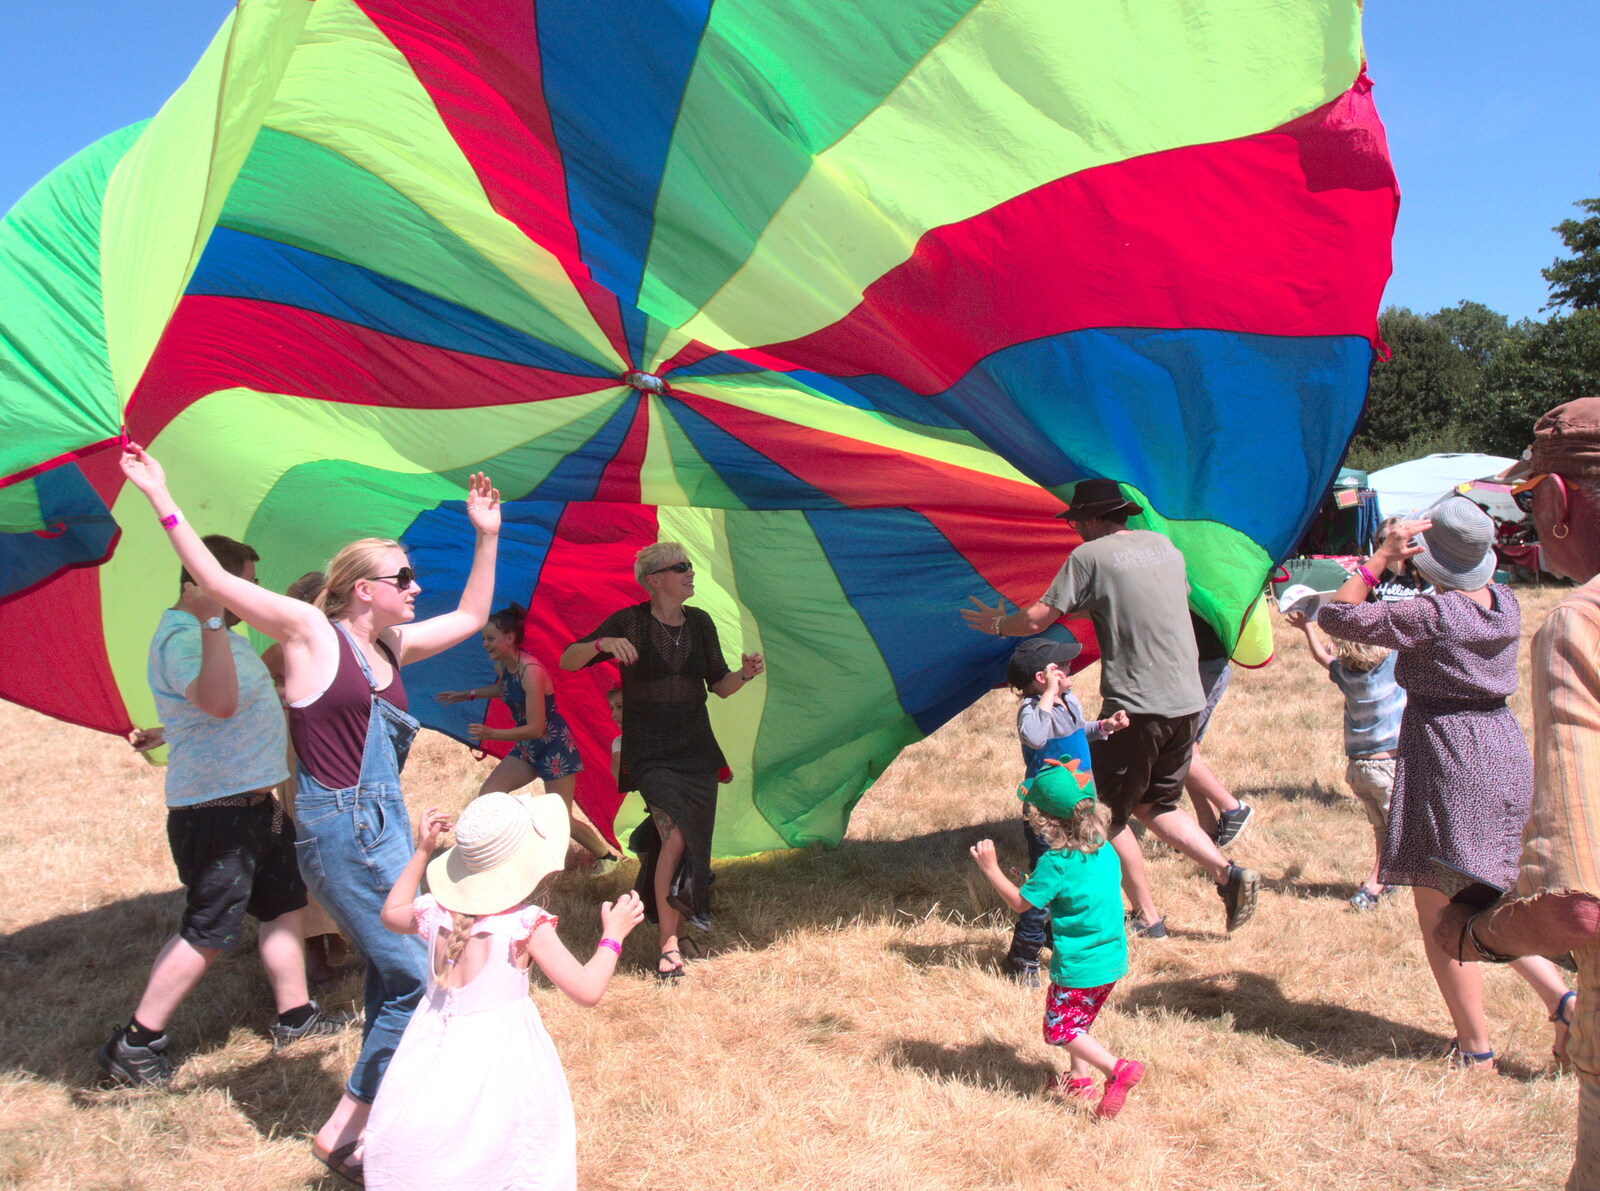 The parachute nearly takes off from WoW Festival, Burston, Norfolk - 29th June - 1st July 2018